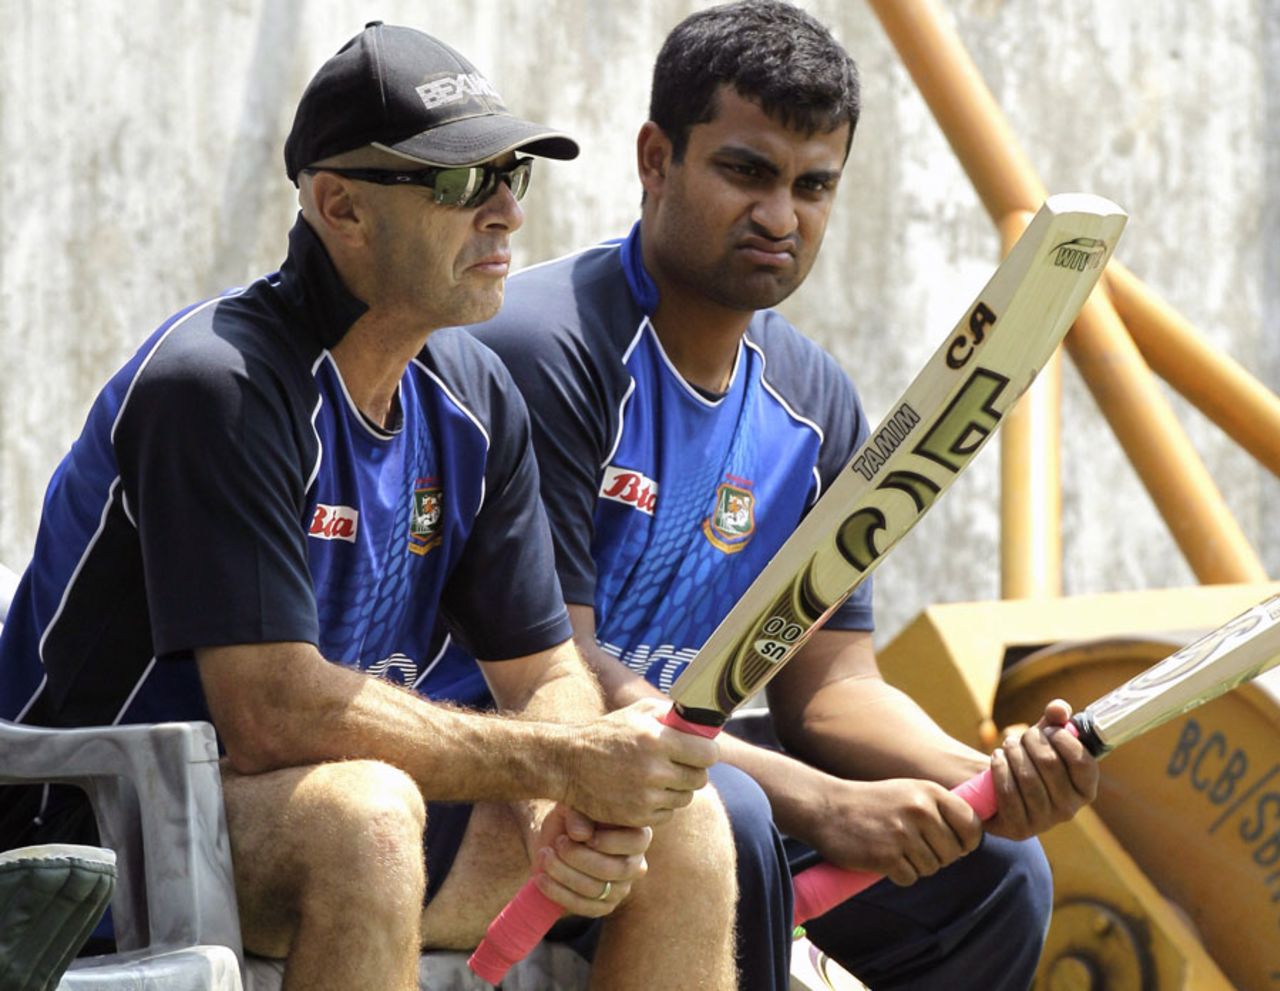 Coach Jamie Siddons and Tamim Iqbal inspect bats during a training session, Mirpur, March 18, 2011